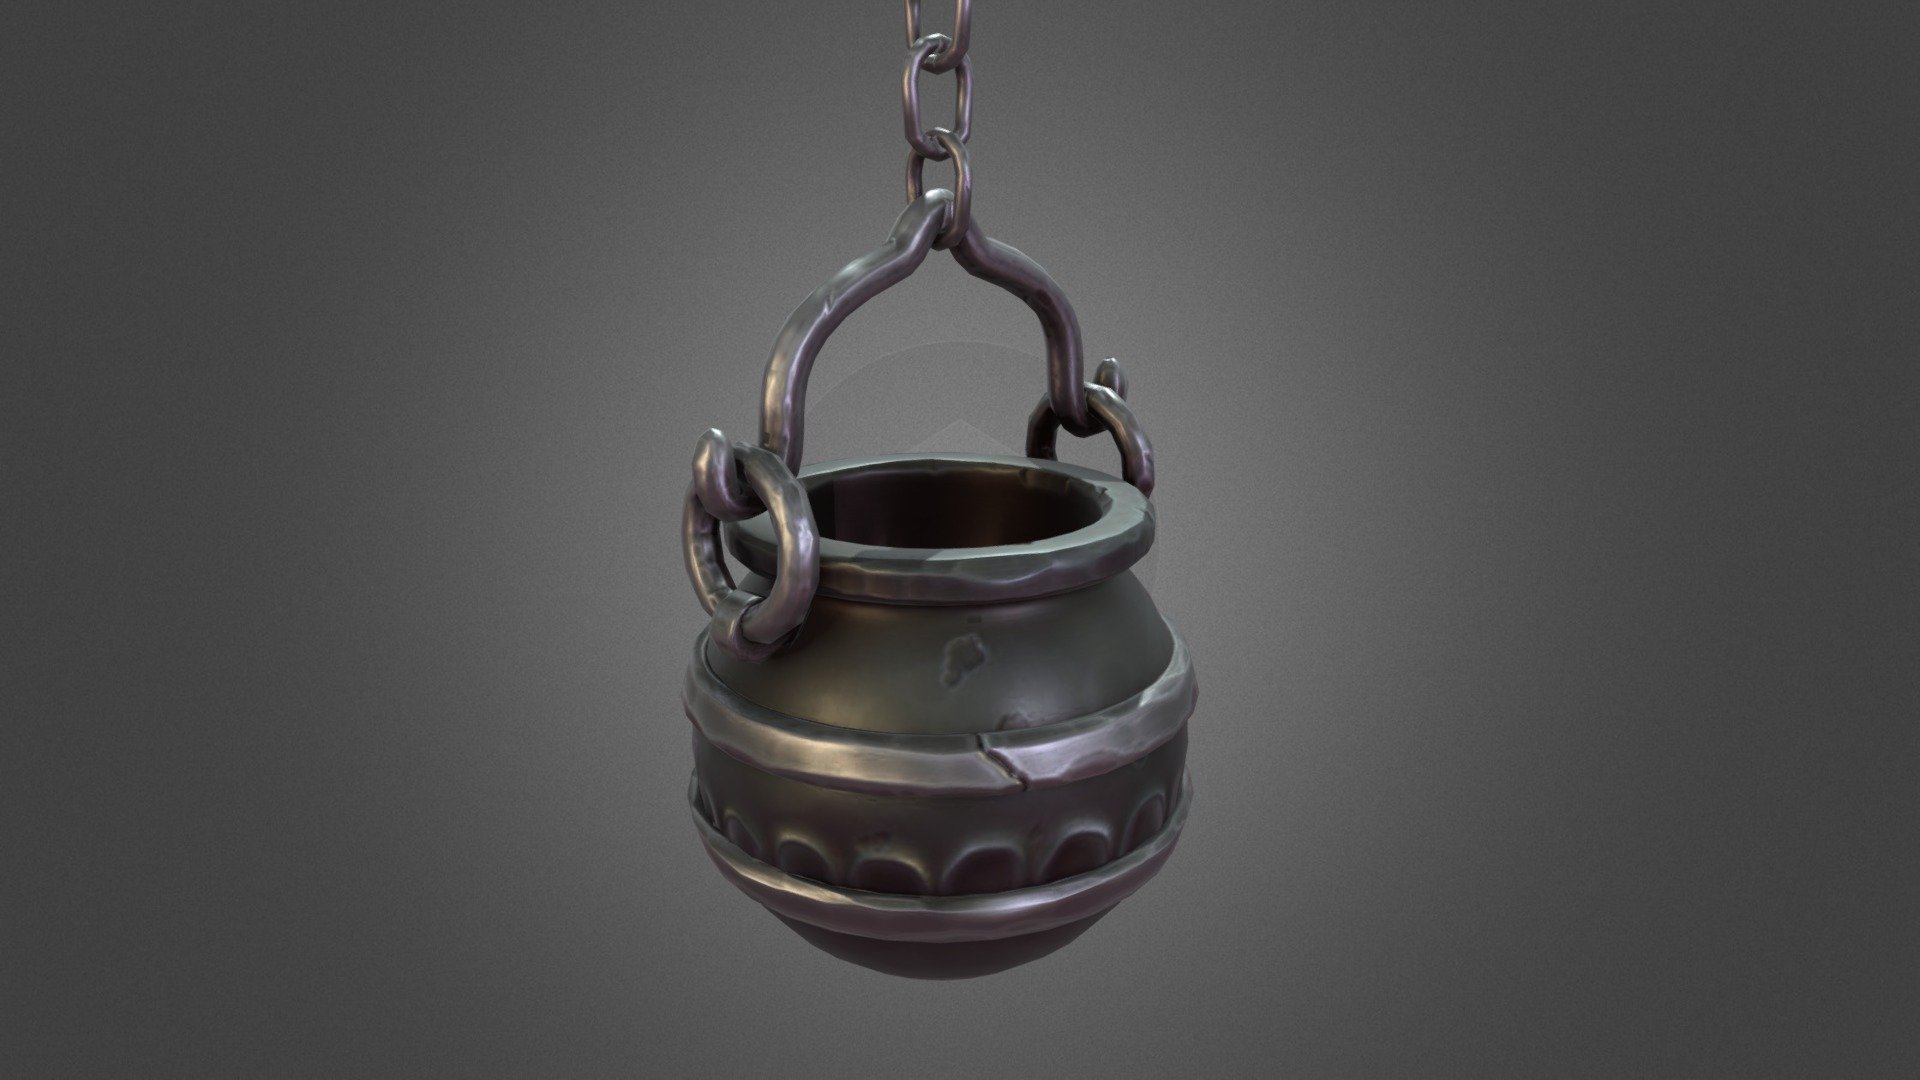 I made this cauldron for our tavern game in 2020. I used blender, zbrush and substance painter making this model 3d model